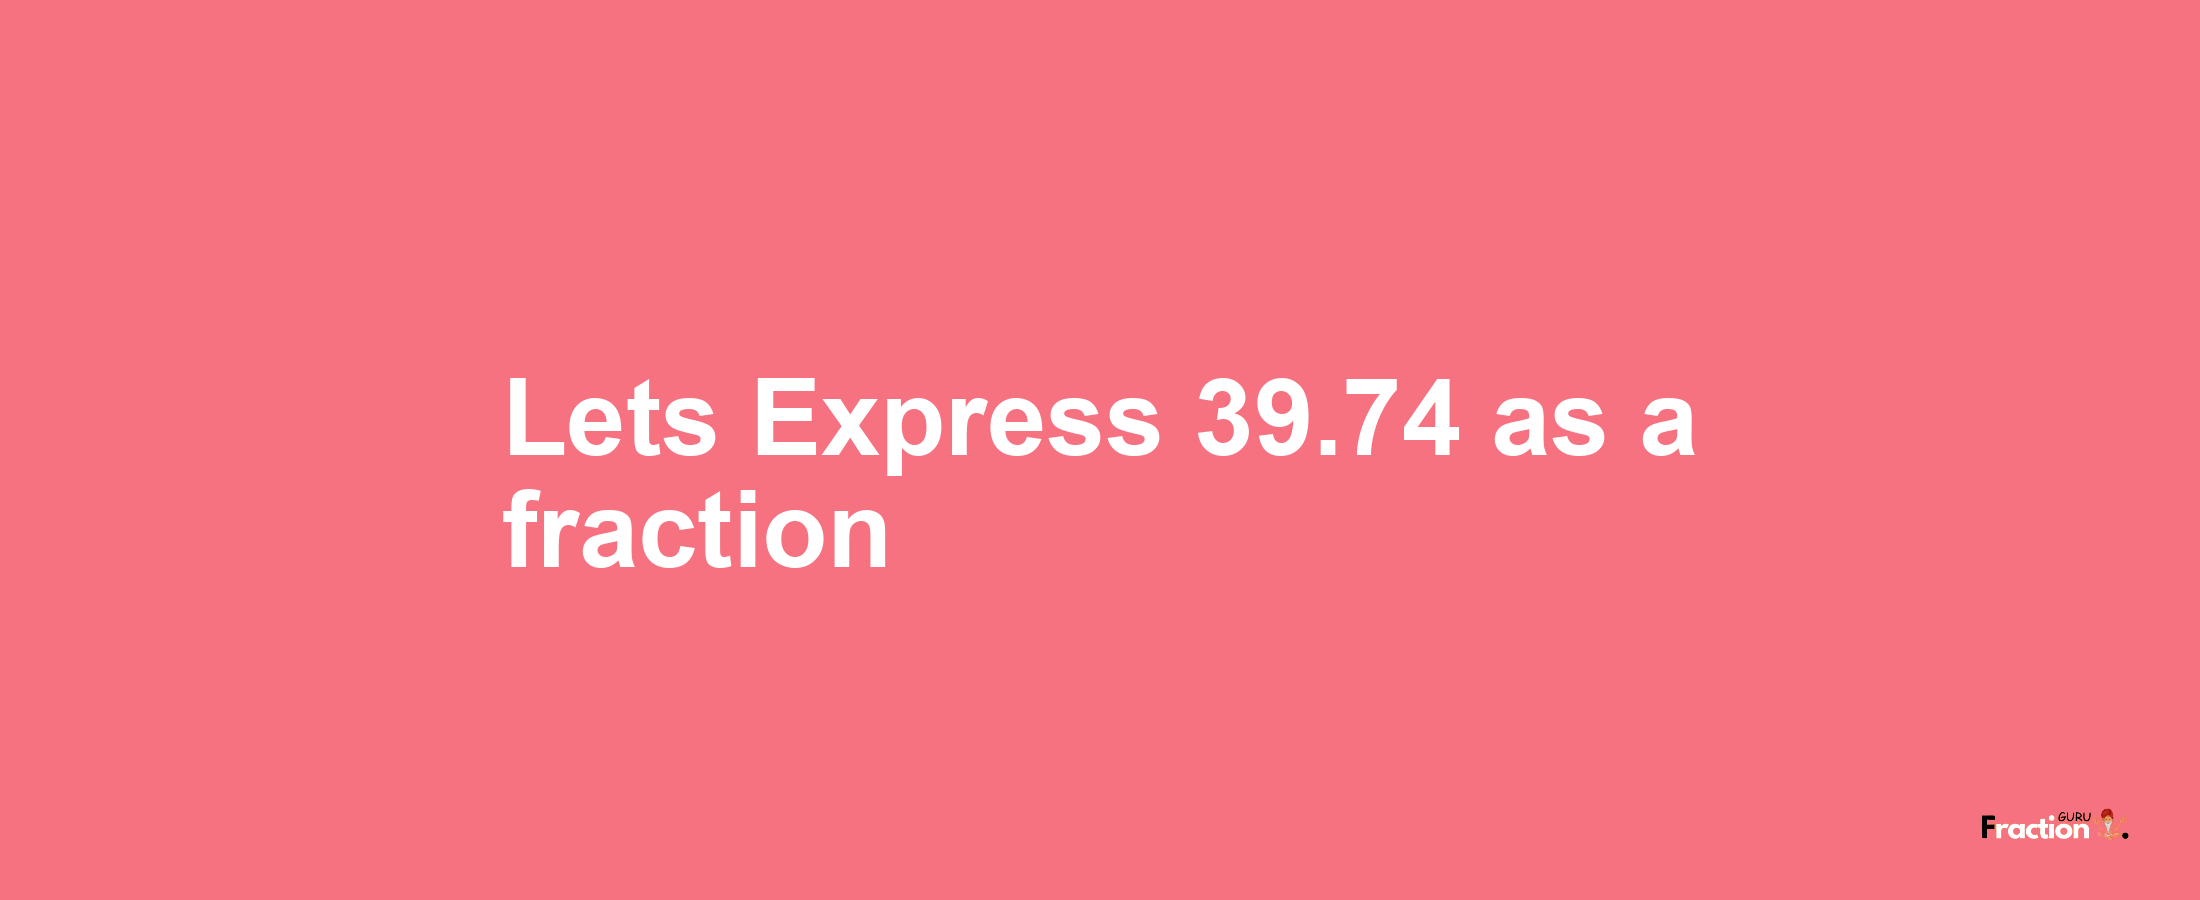 Lets Express 39.74 as afraction